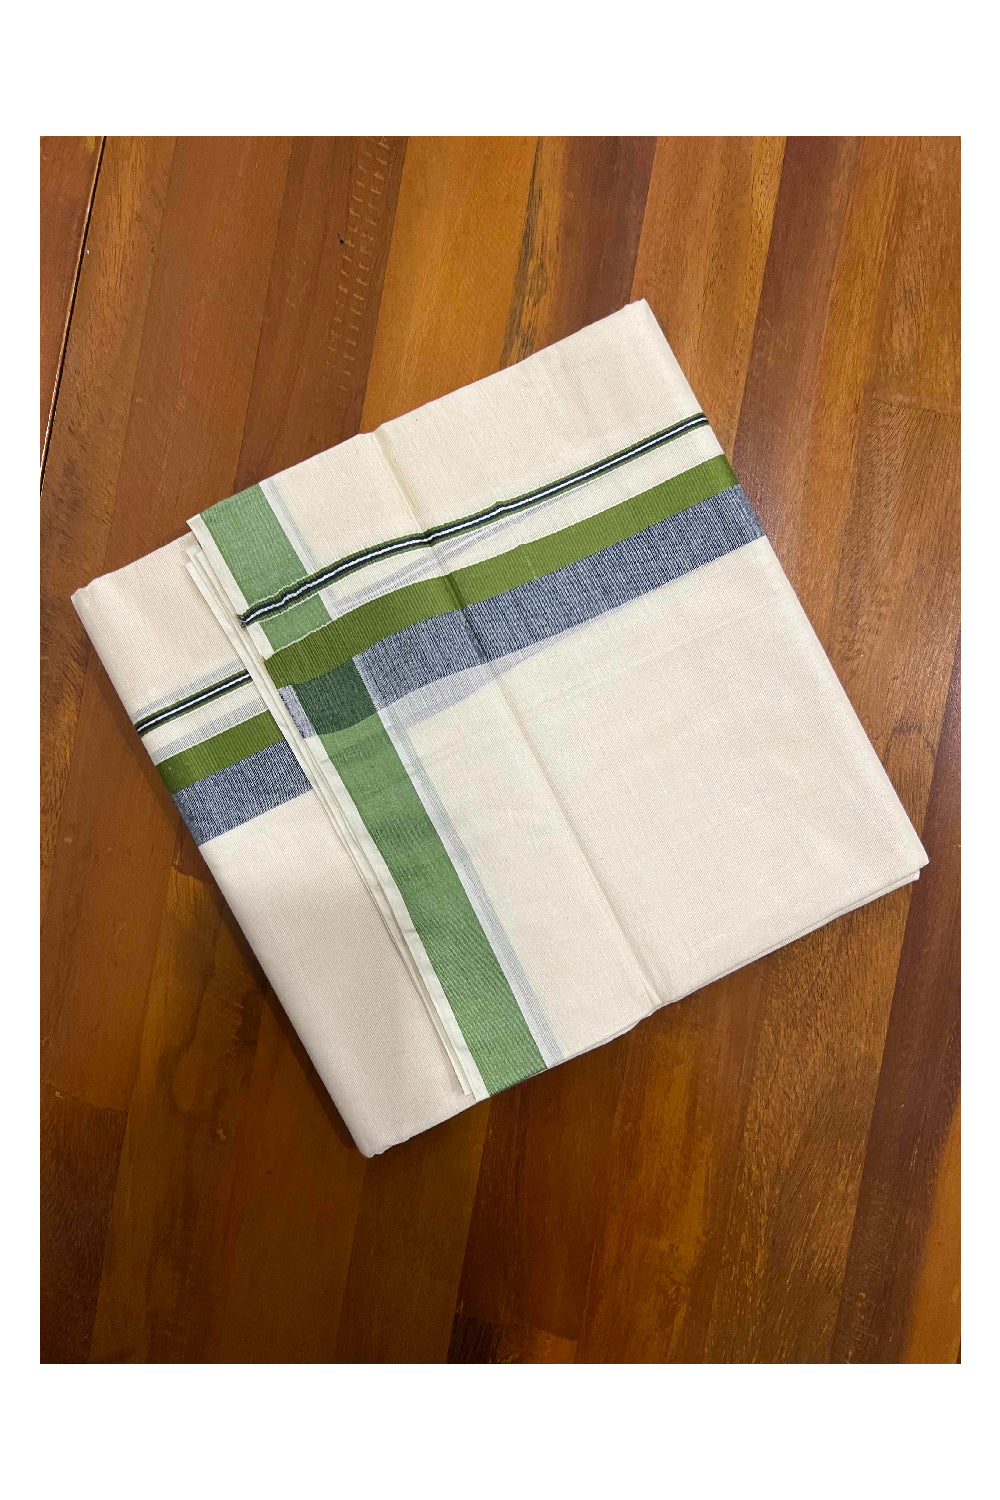 Off White Pure Cotton Double Mundu with Green and Black Shaded Border (South Indian Dhoti)